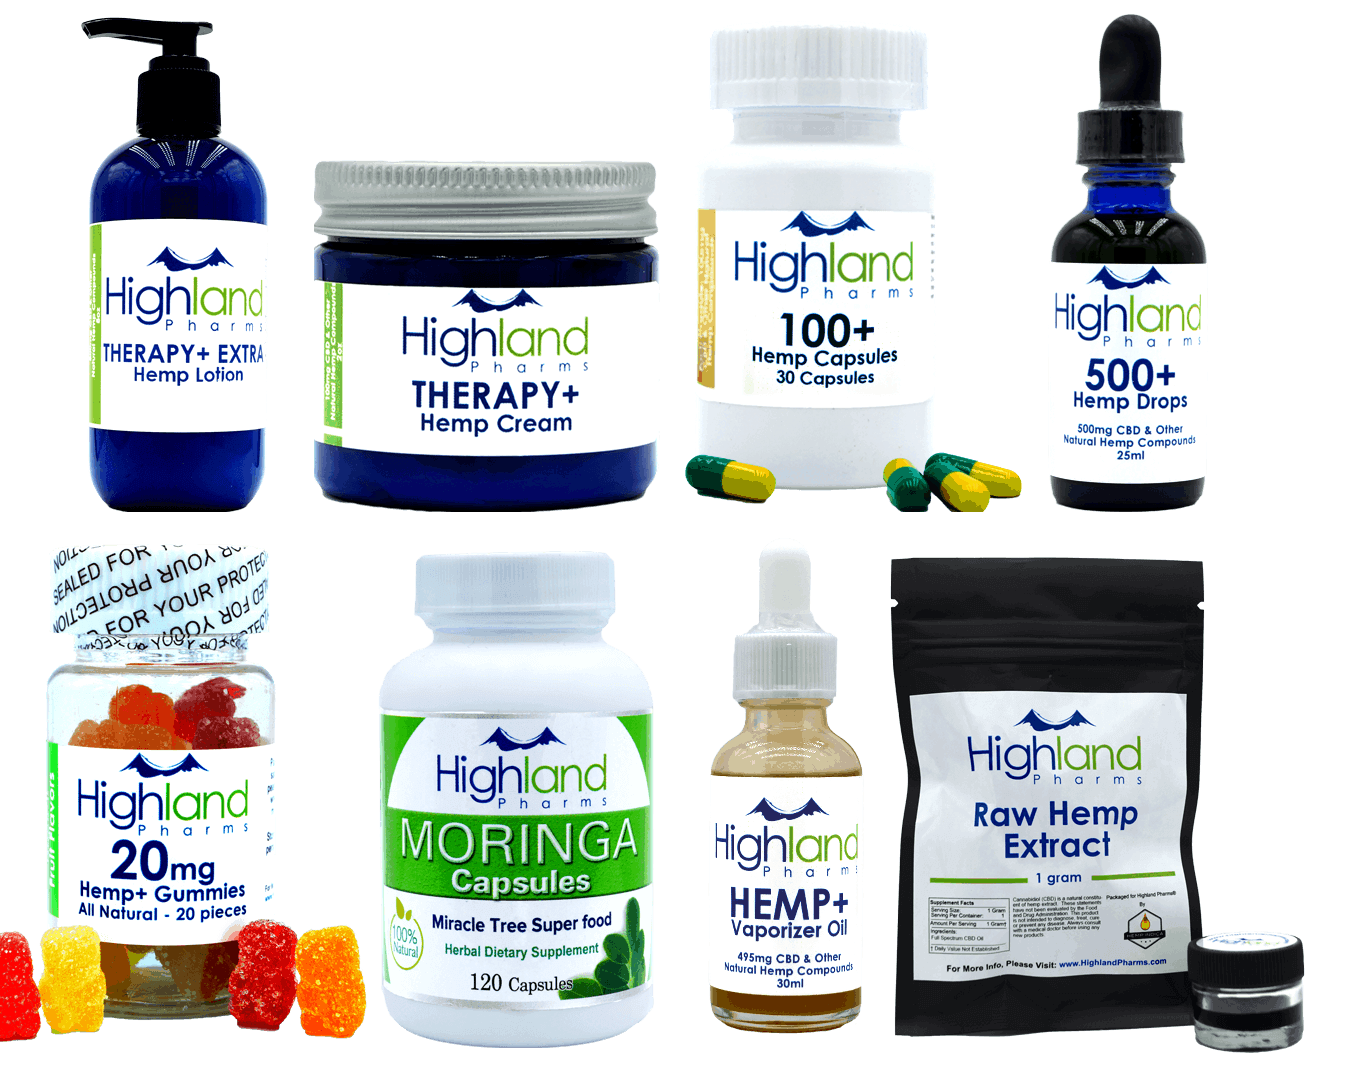 Highland Pharms Review